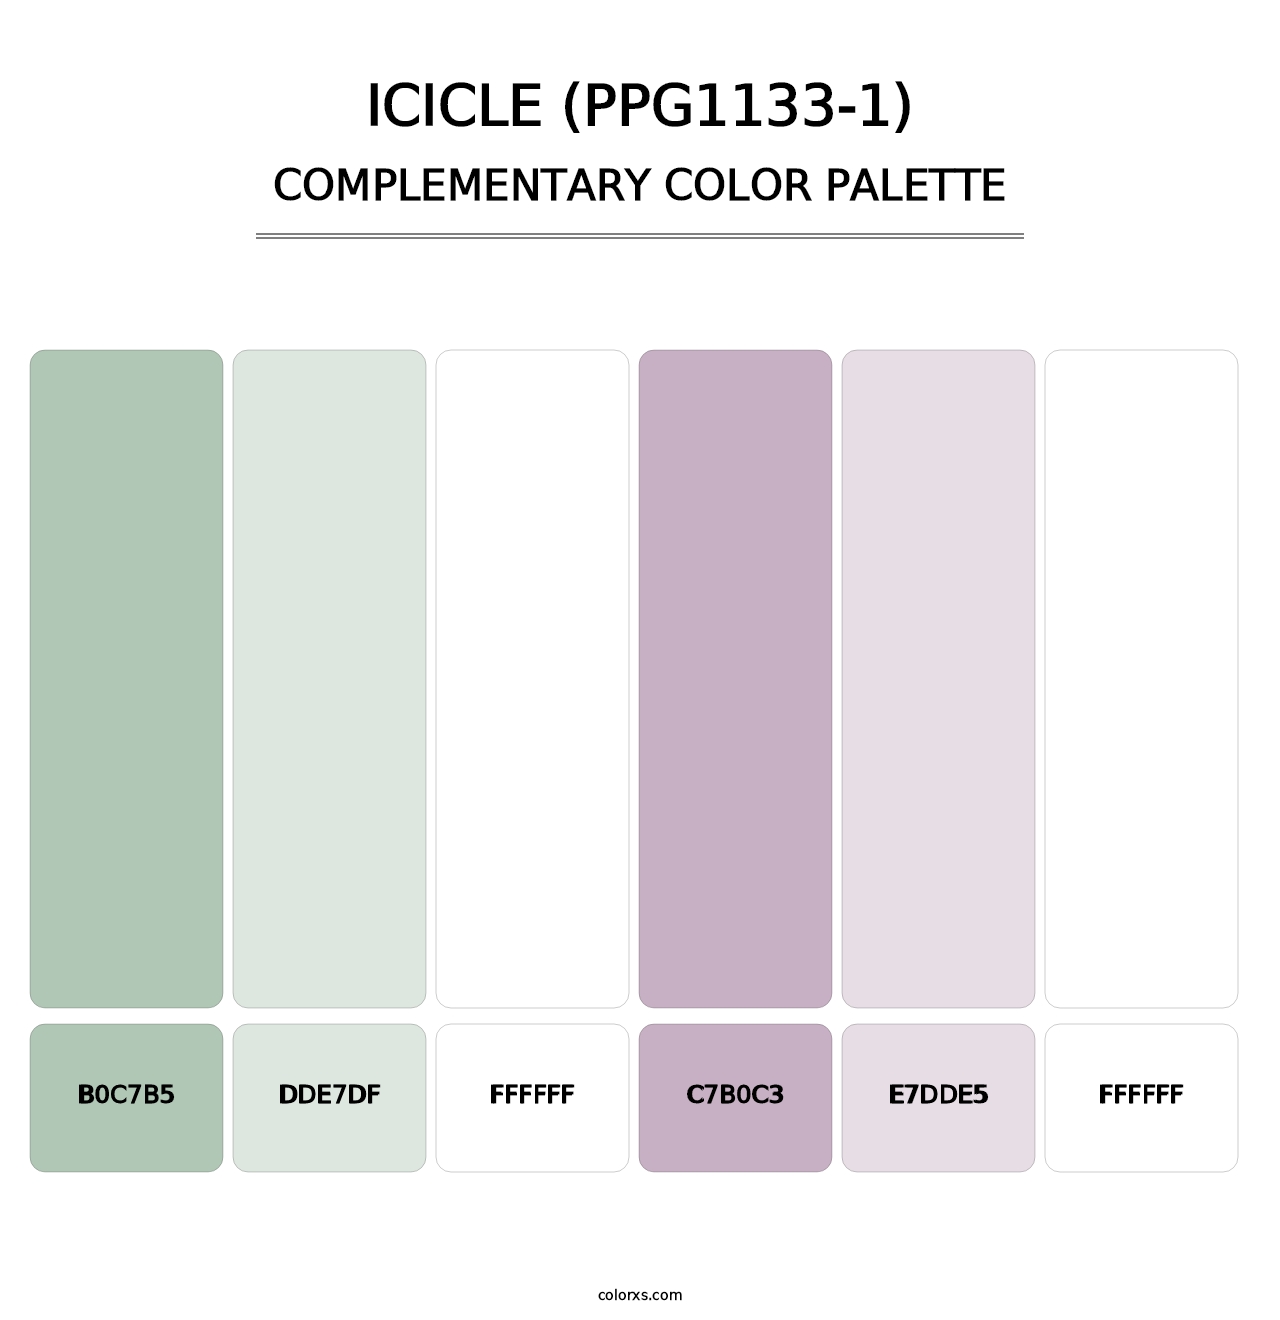 Icicle (PPG1133-1) - Complementary Color Palette